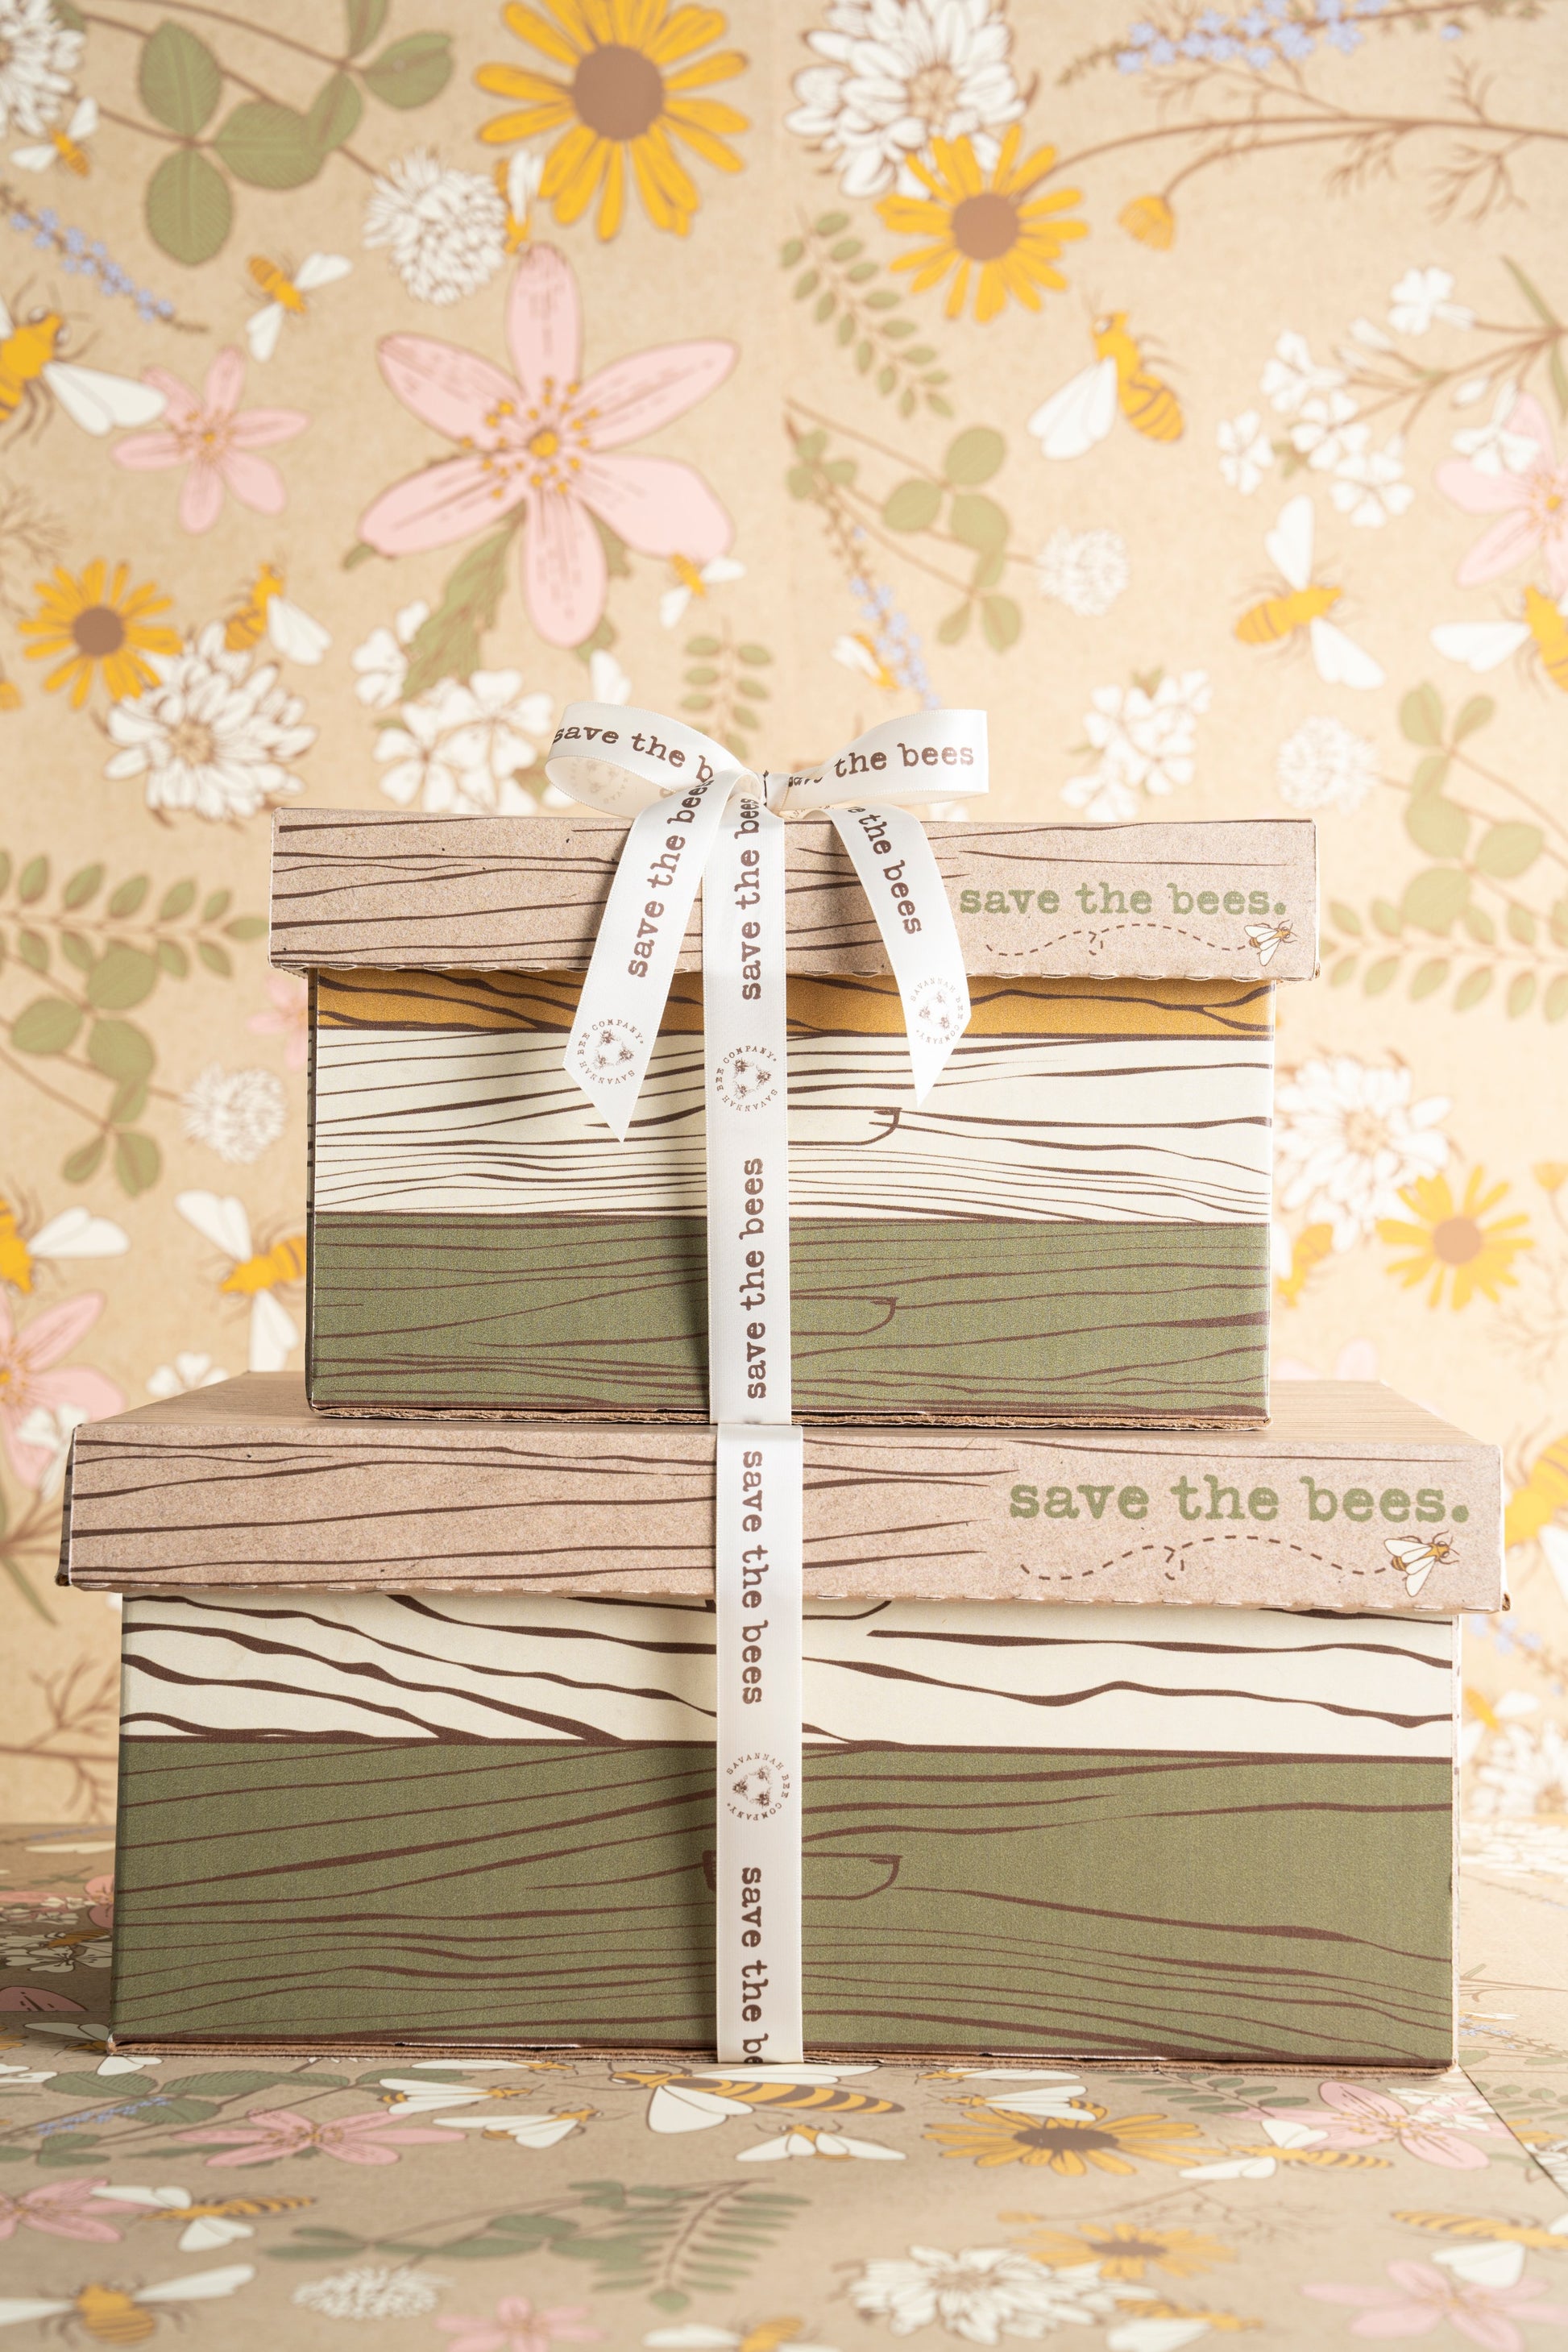 Two save the bees gift boxes stacked with a floral background.